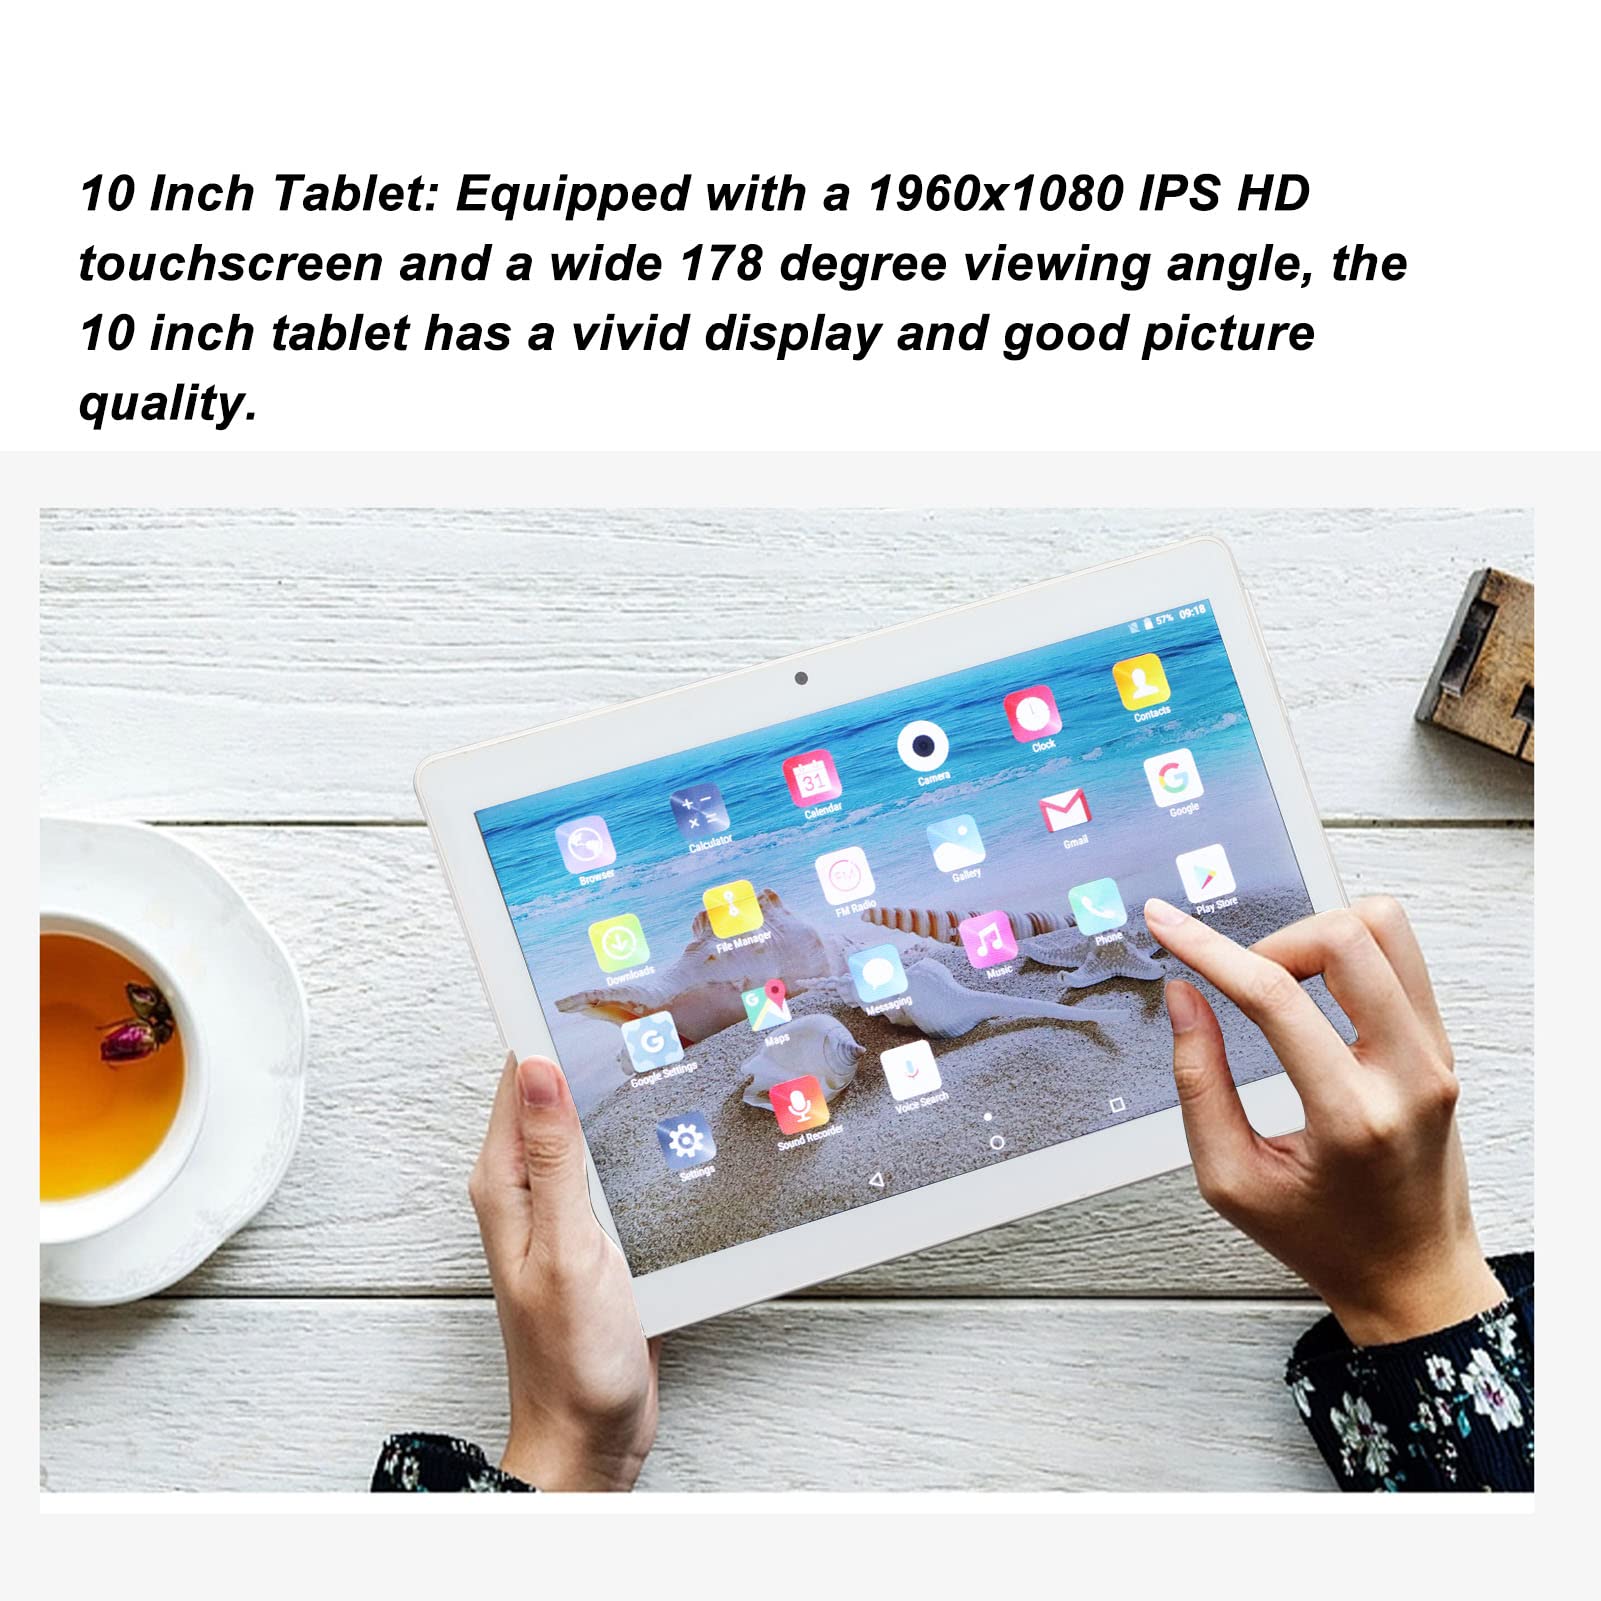 10-Inch Round Tablet Octa Core Processor, Dual Sim Dual Standby Built in 2GB 32GB Memory the Front 2 Mp and Rear 5 Mp Cameras 128GB Expand Support, 1960x1080 IPS HD(ld)